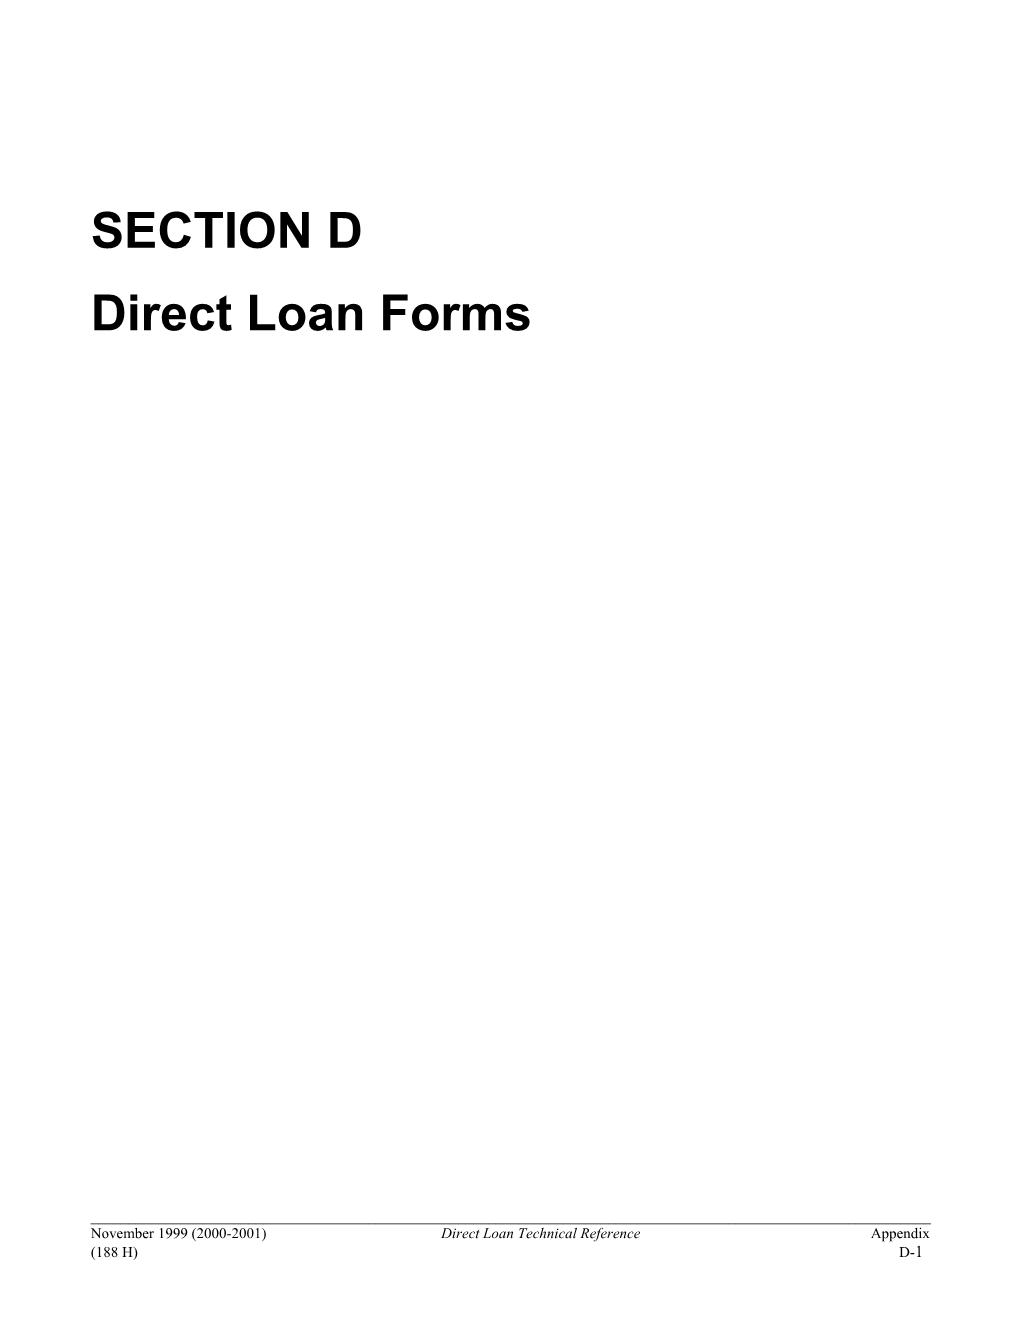 Section D: Direct Loan Forms